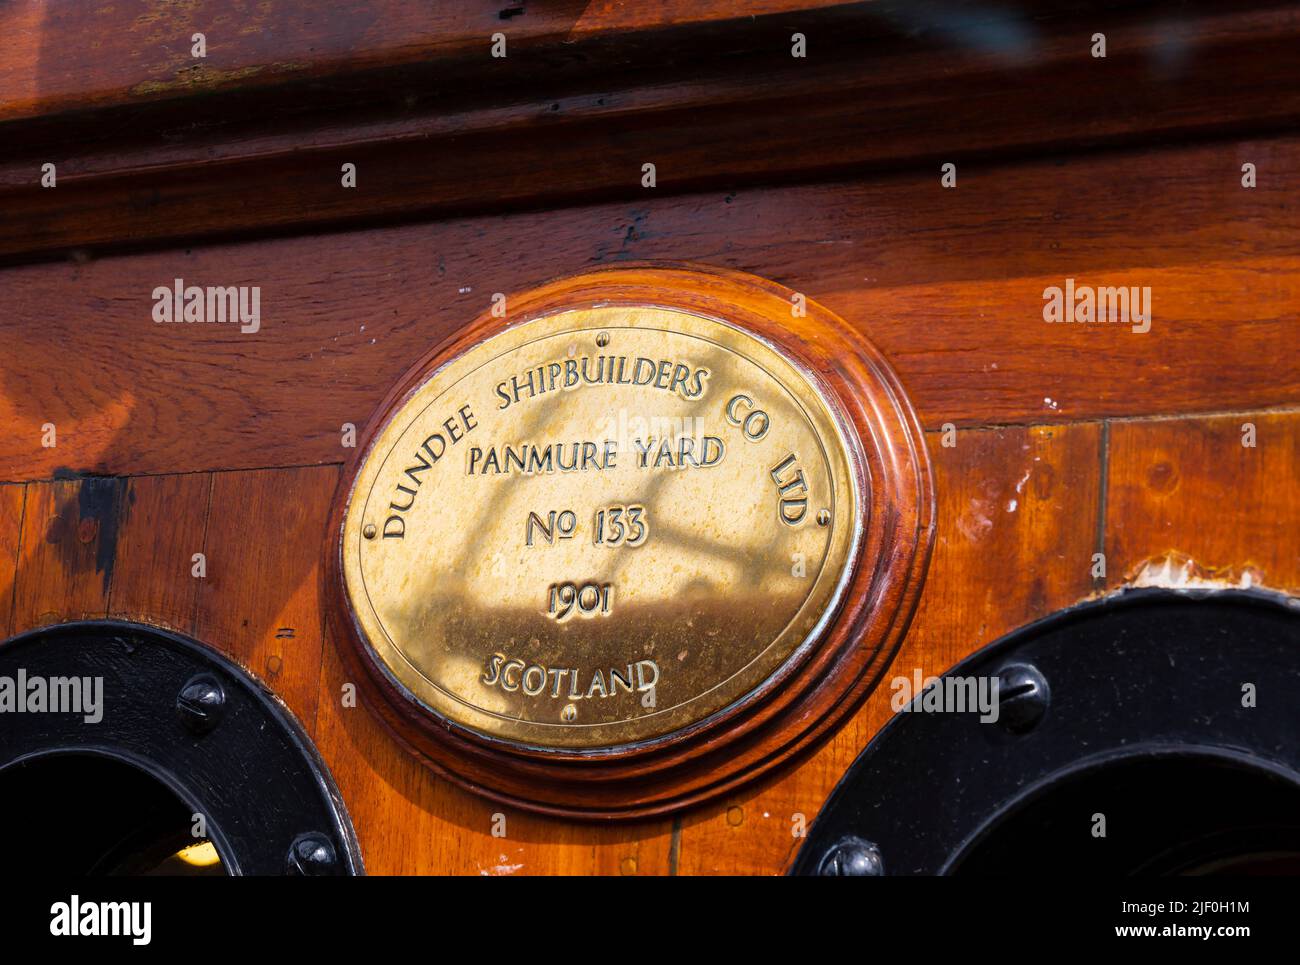 Makers plate. Royal Research Ship RRS Discovery. Antarctic exploration vessel used by Scott and Shackleton. discovery point, Dundee, Angus, Scotland Stock Photo